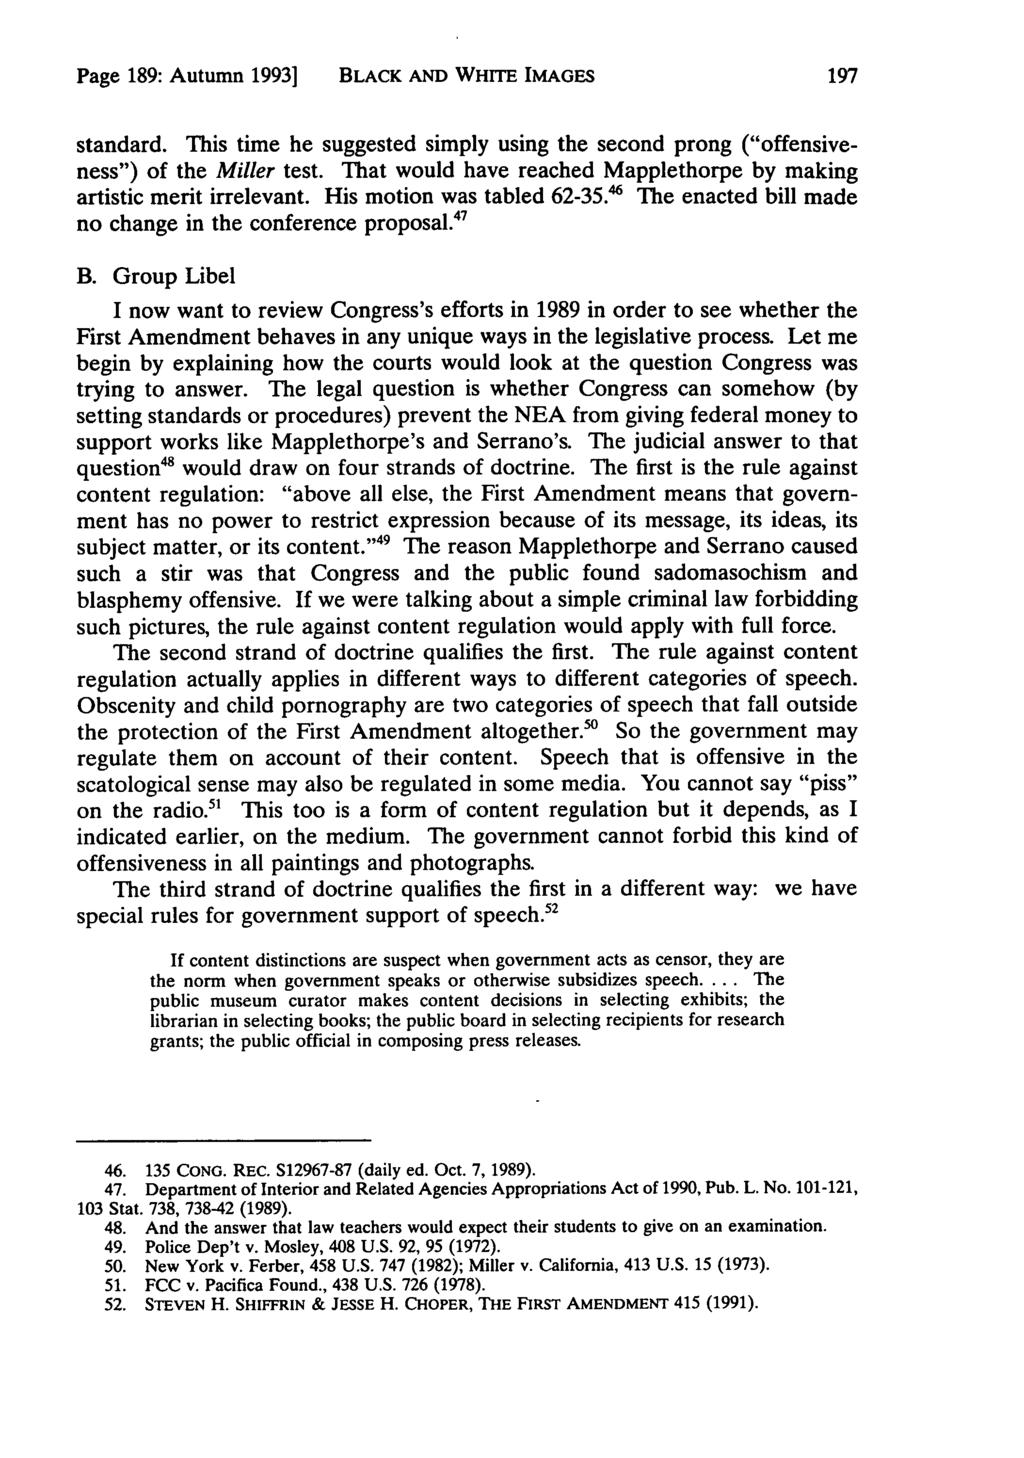 Page 189: Autumn 1993] BLACK AND WHITE IMAGES standard. This time he suggested simply using the second prong ("offensiveness") of the Miller test.